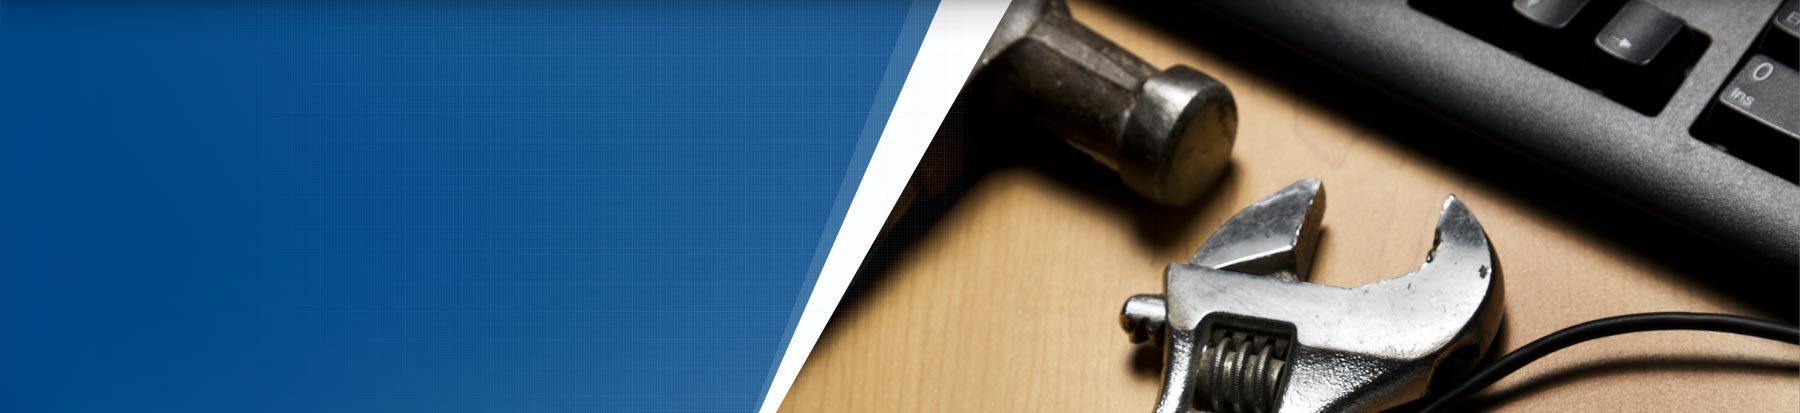 Header graphic showing tools